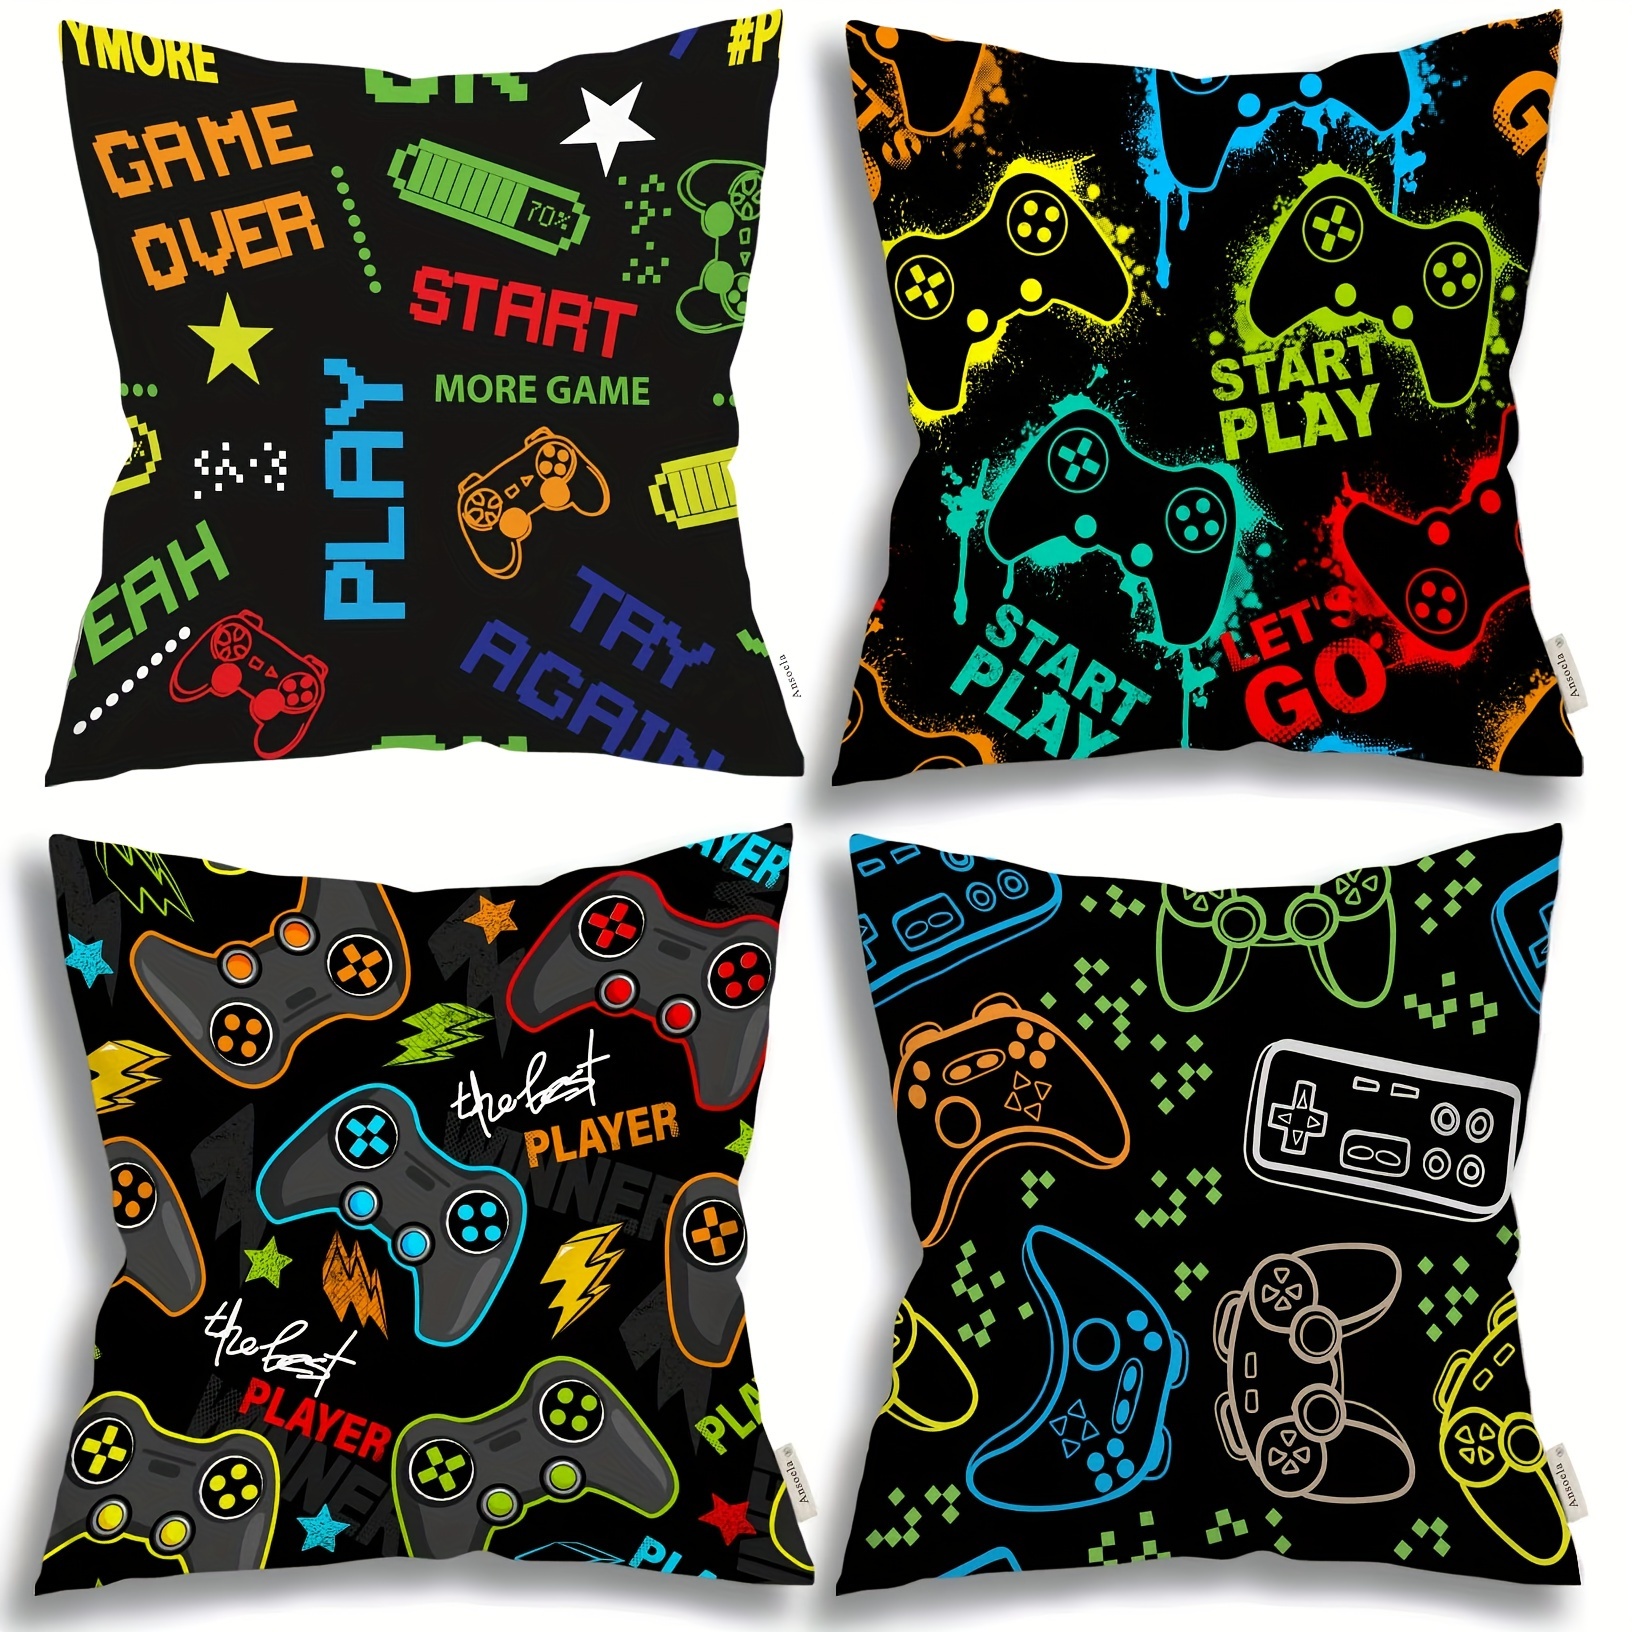 

4pcs Gaming Pillow Throw Pillows Gamer Gifts Cushion Cover Gamer Decor For Boys Room Bedroom Couch Decorative Pillows Short Plush Decor 18x18 Inch